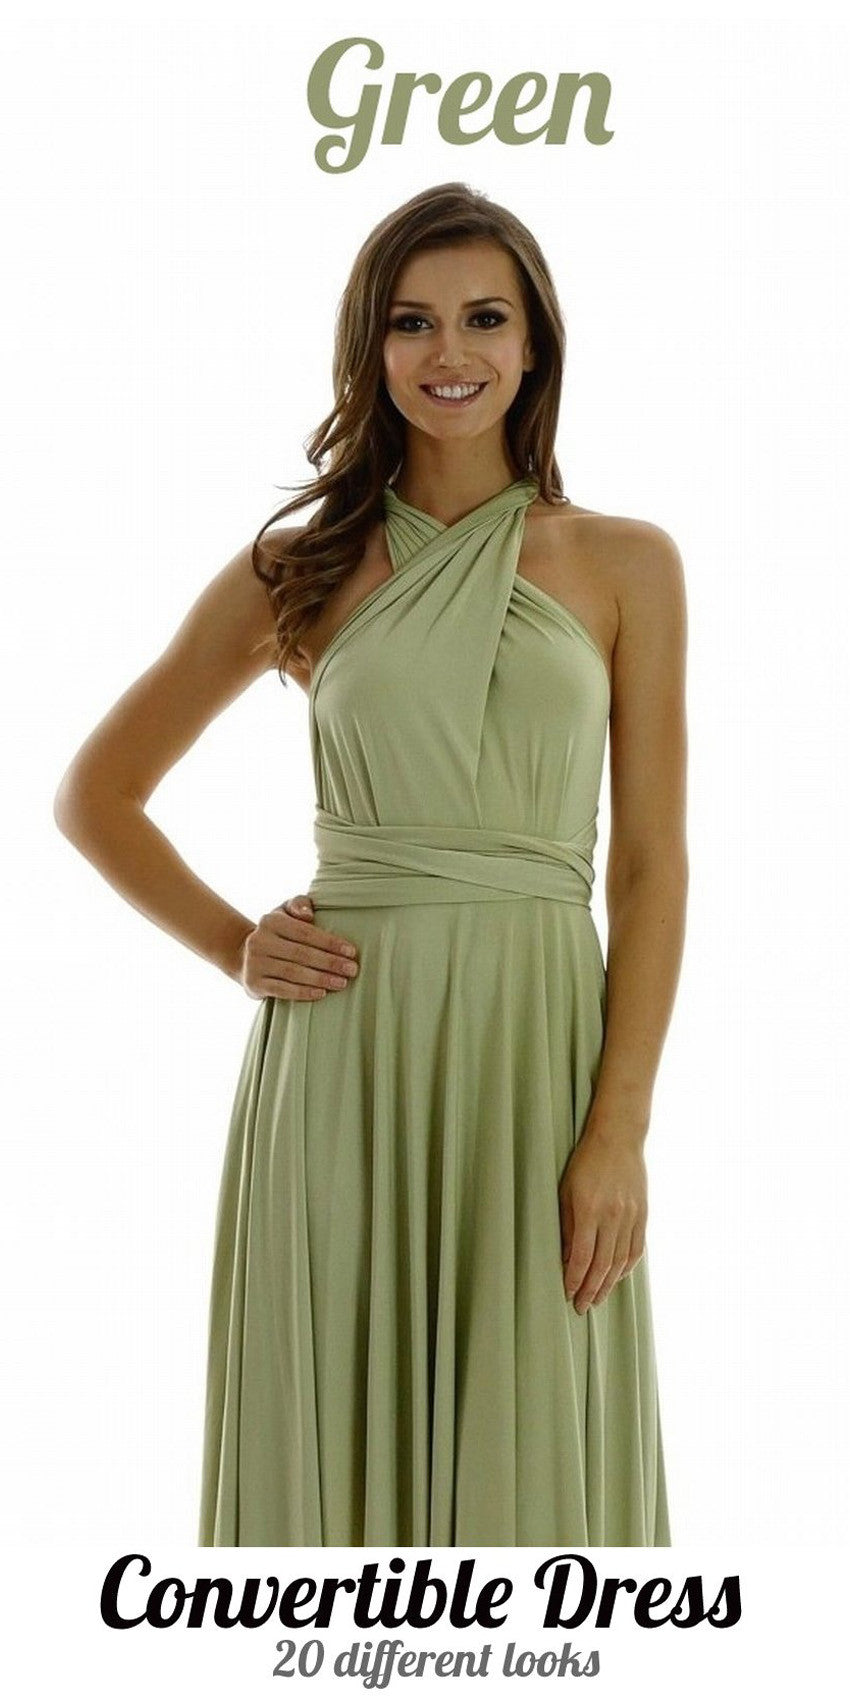 Poly USA 7022 - Long Green Convertible Jersey Dress 20 Different Looks